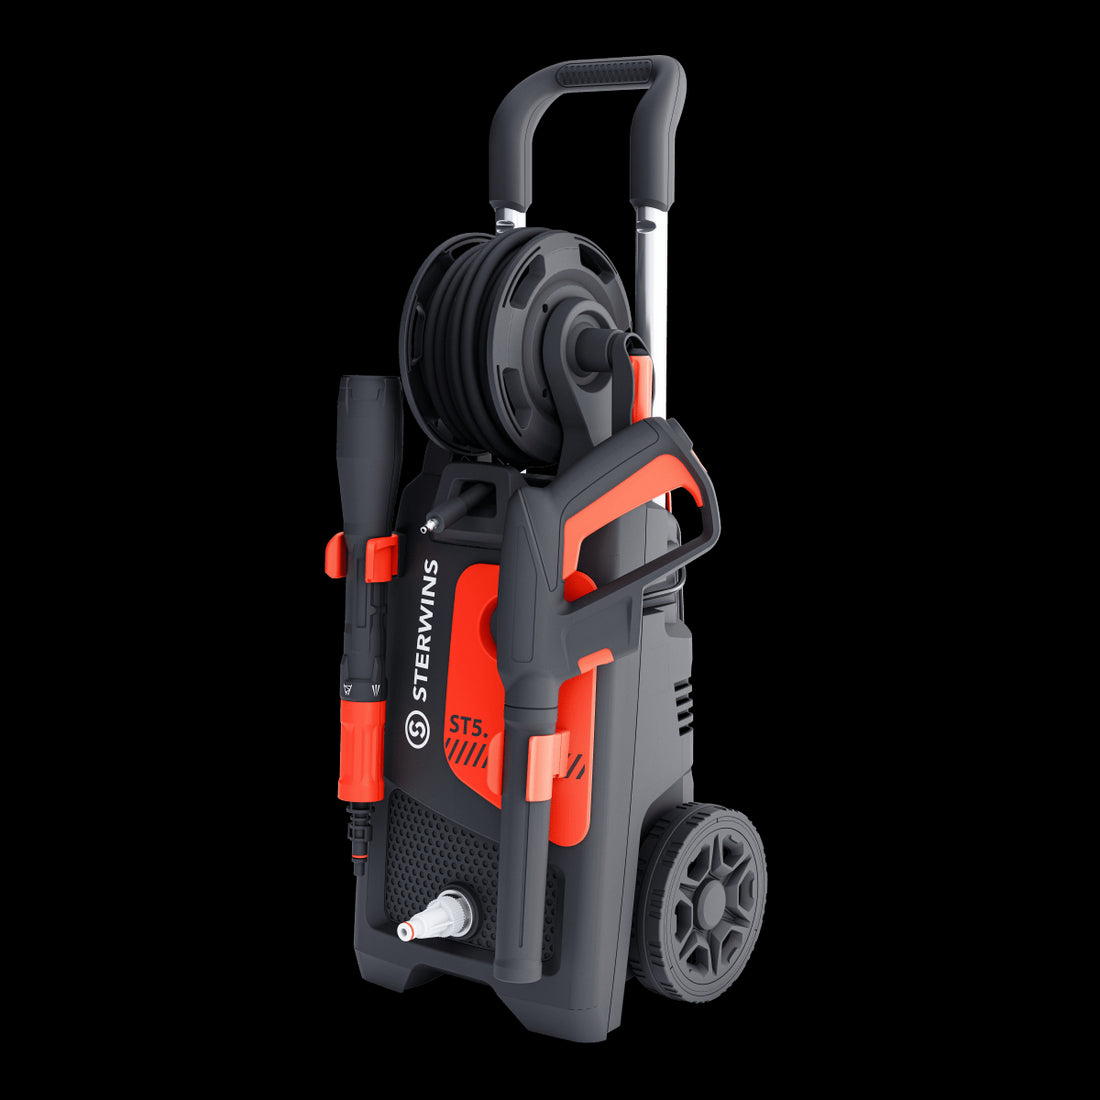 STERWINS ST5 PRESSURE WASHER MAX. PRESSURE 165BAR WITH LARGE GUN AND 5-IN-1 LANCE